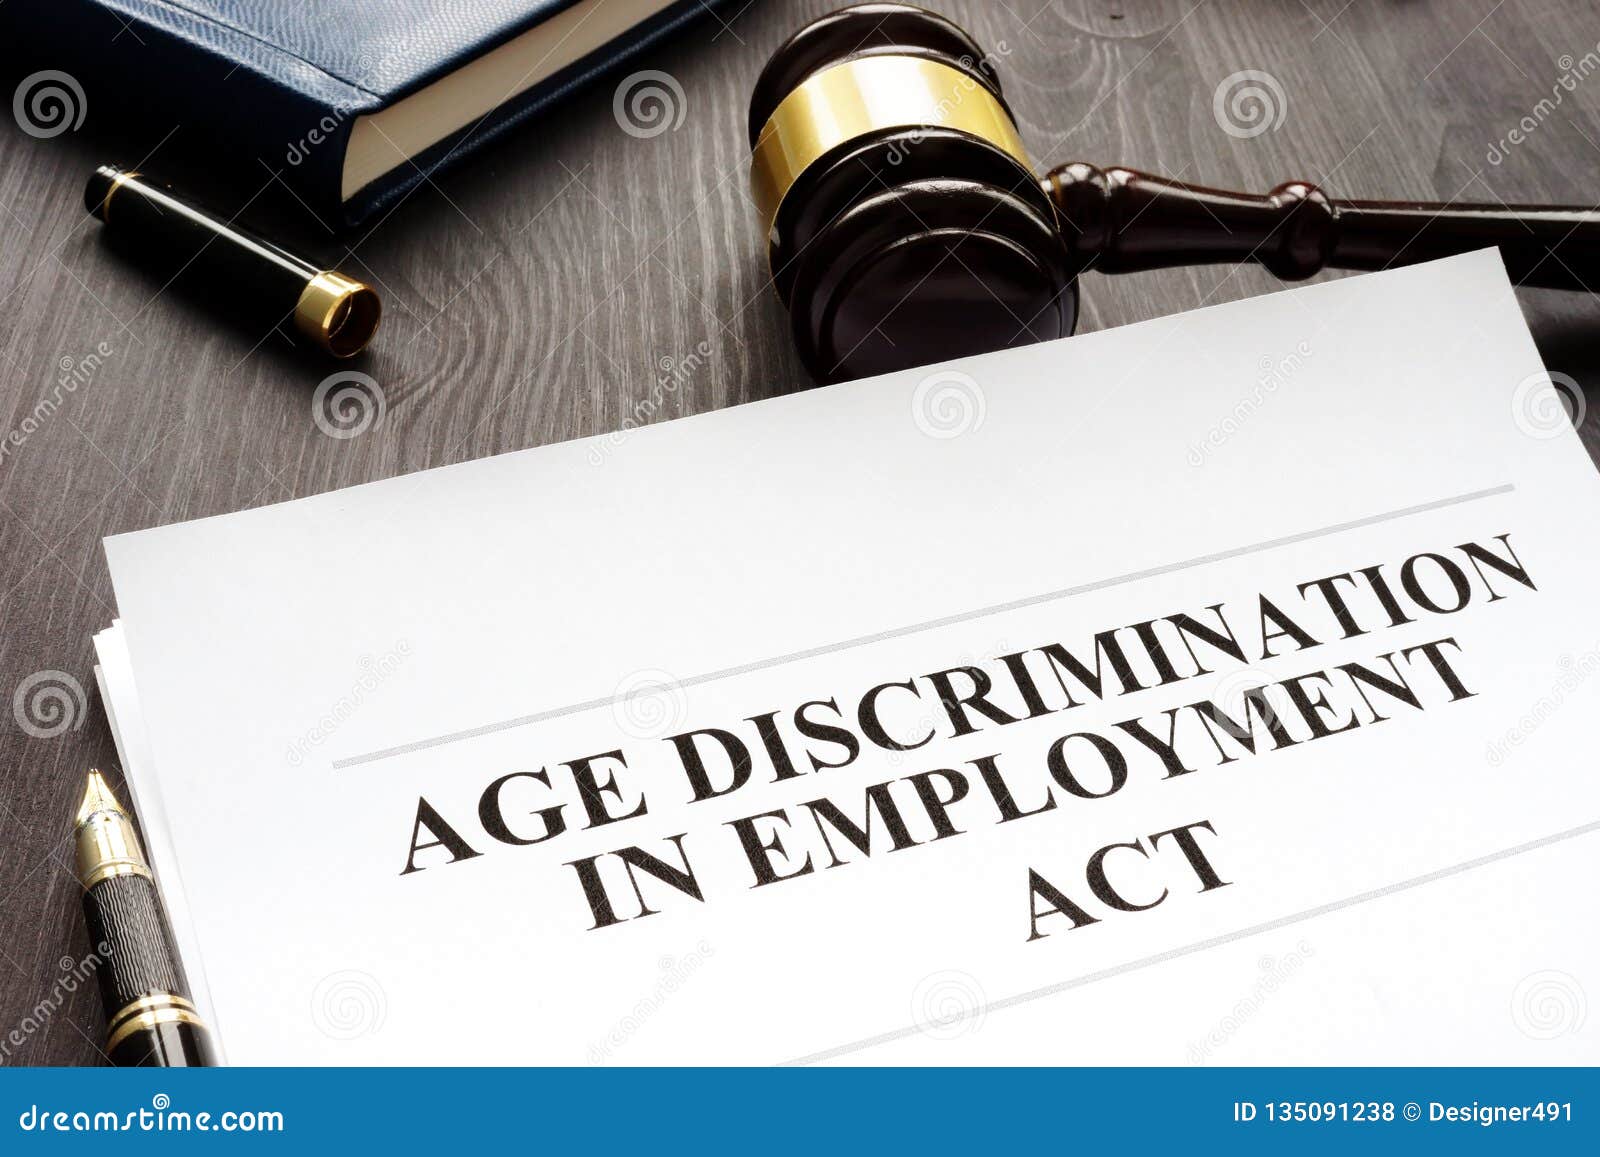 age discrimination in employment act and gavel.